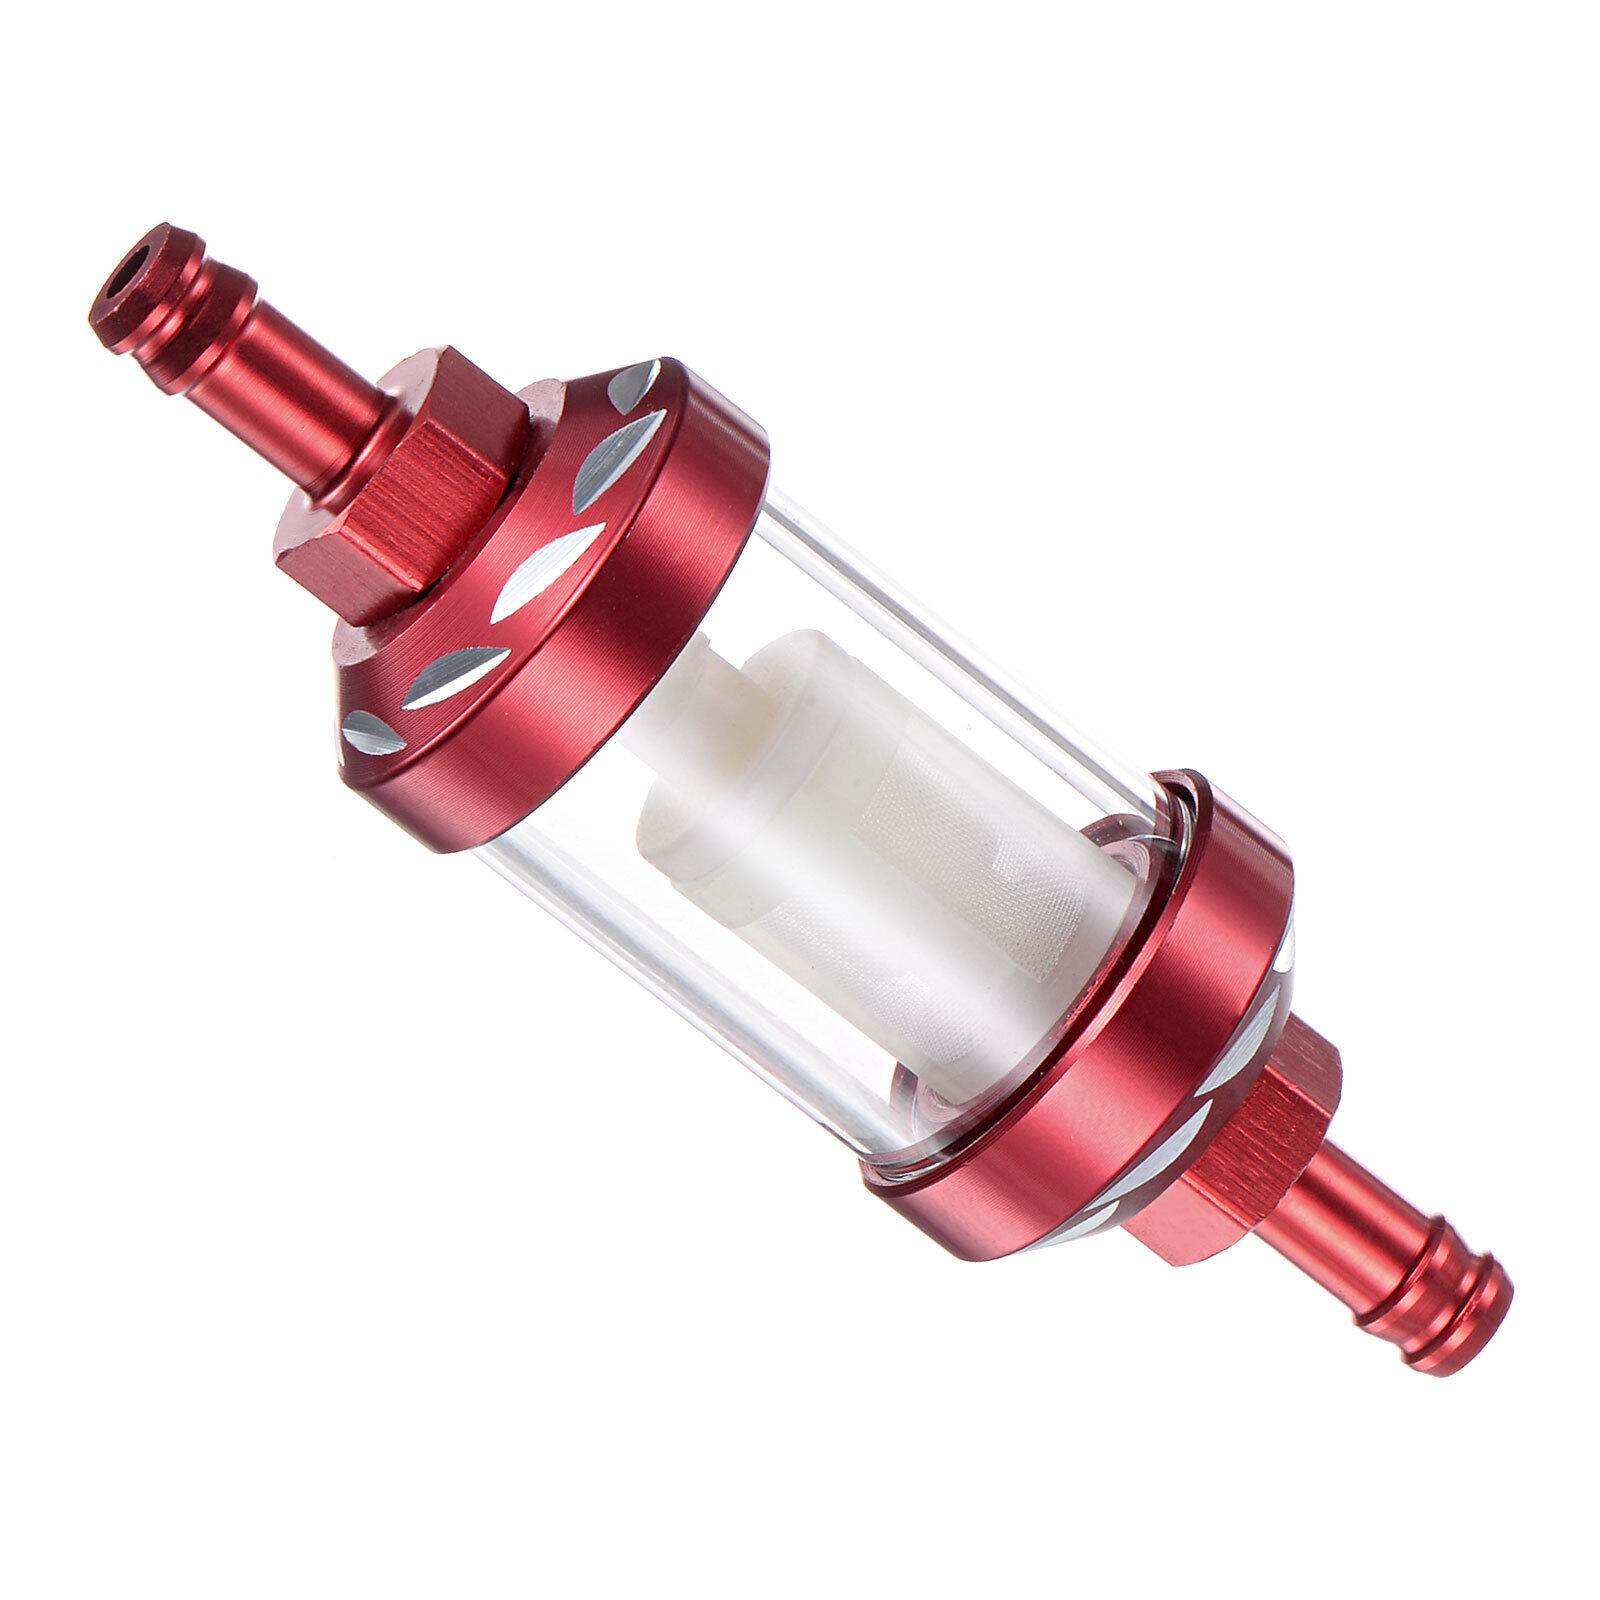 Universal In Line Petrol Fuel Gasoline Oil Filter, Red